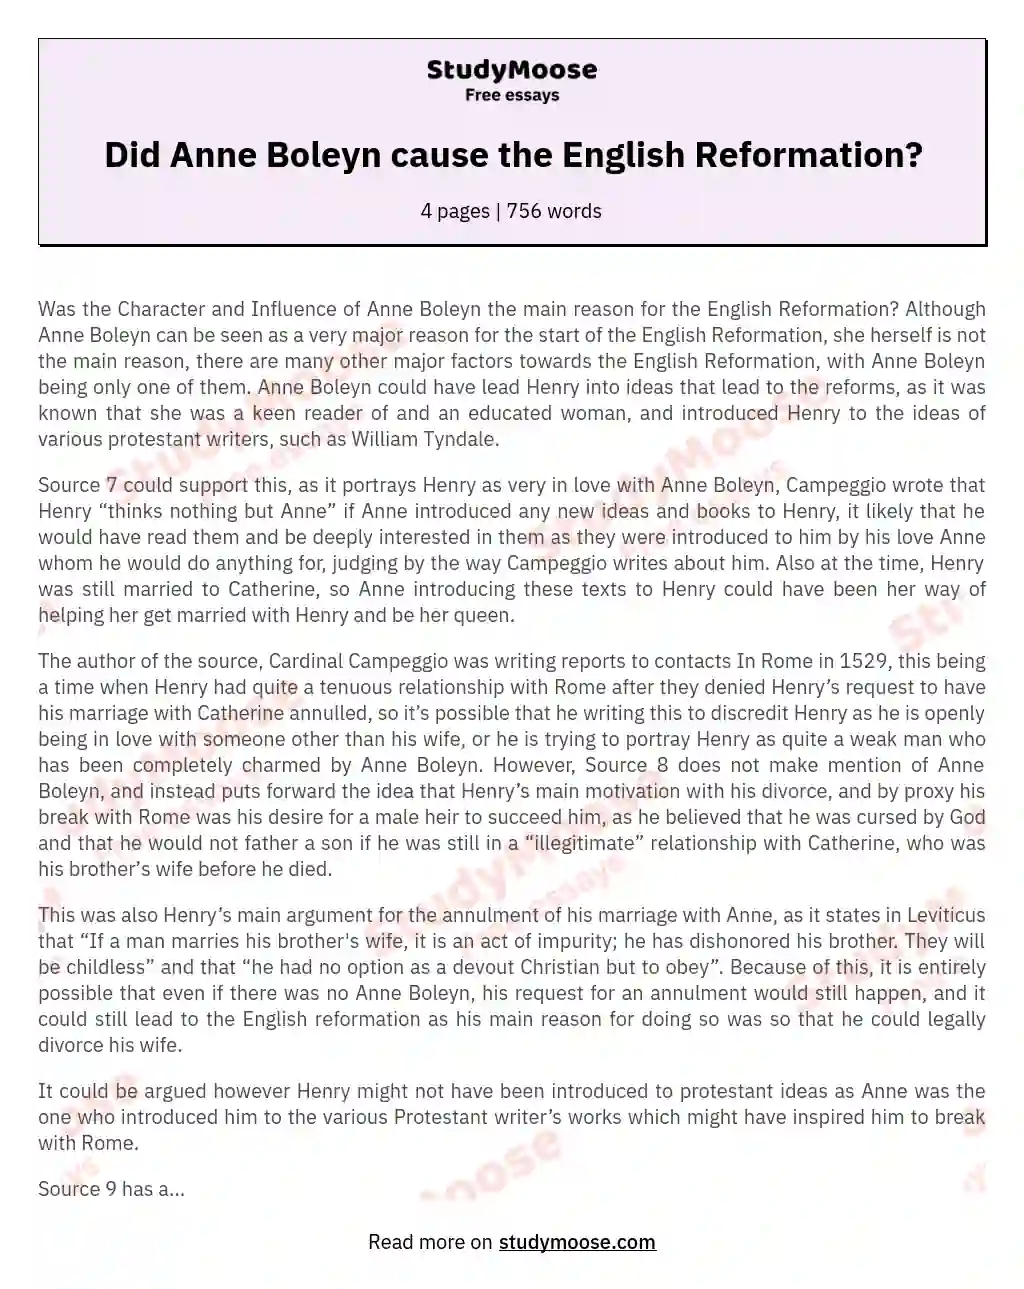 Was the Character and Influence of Anne Boleyn the main reason for the English Reformation?